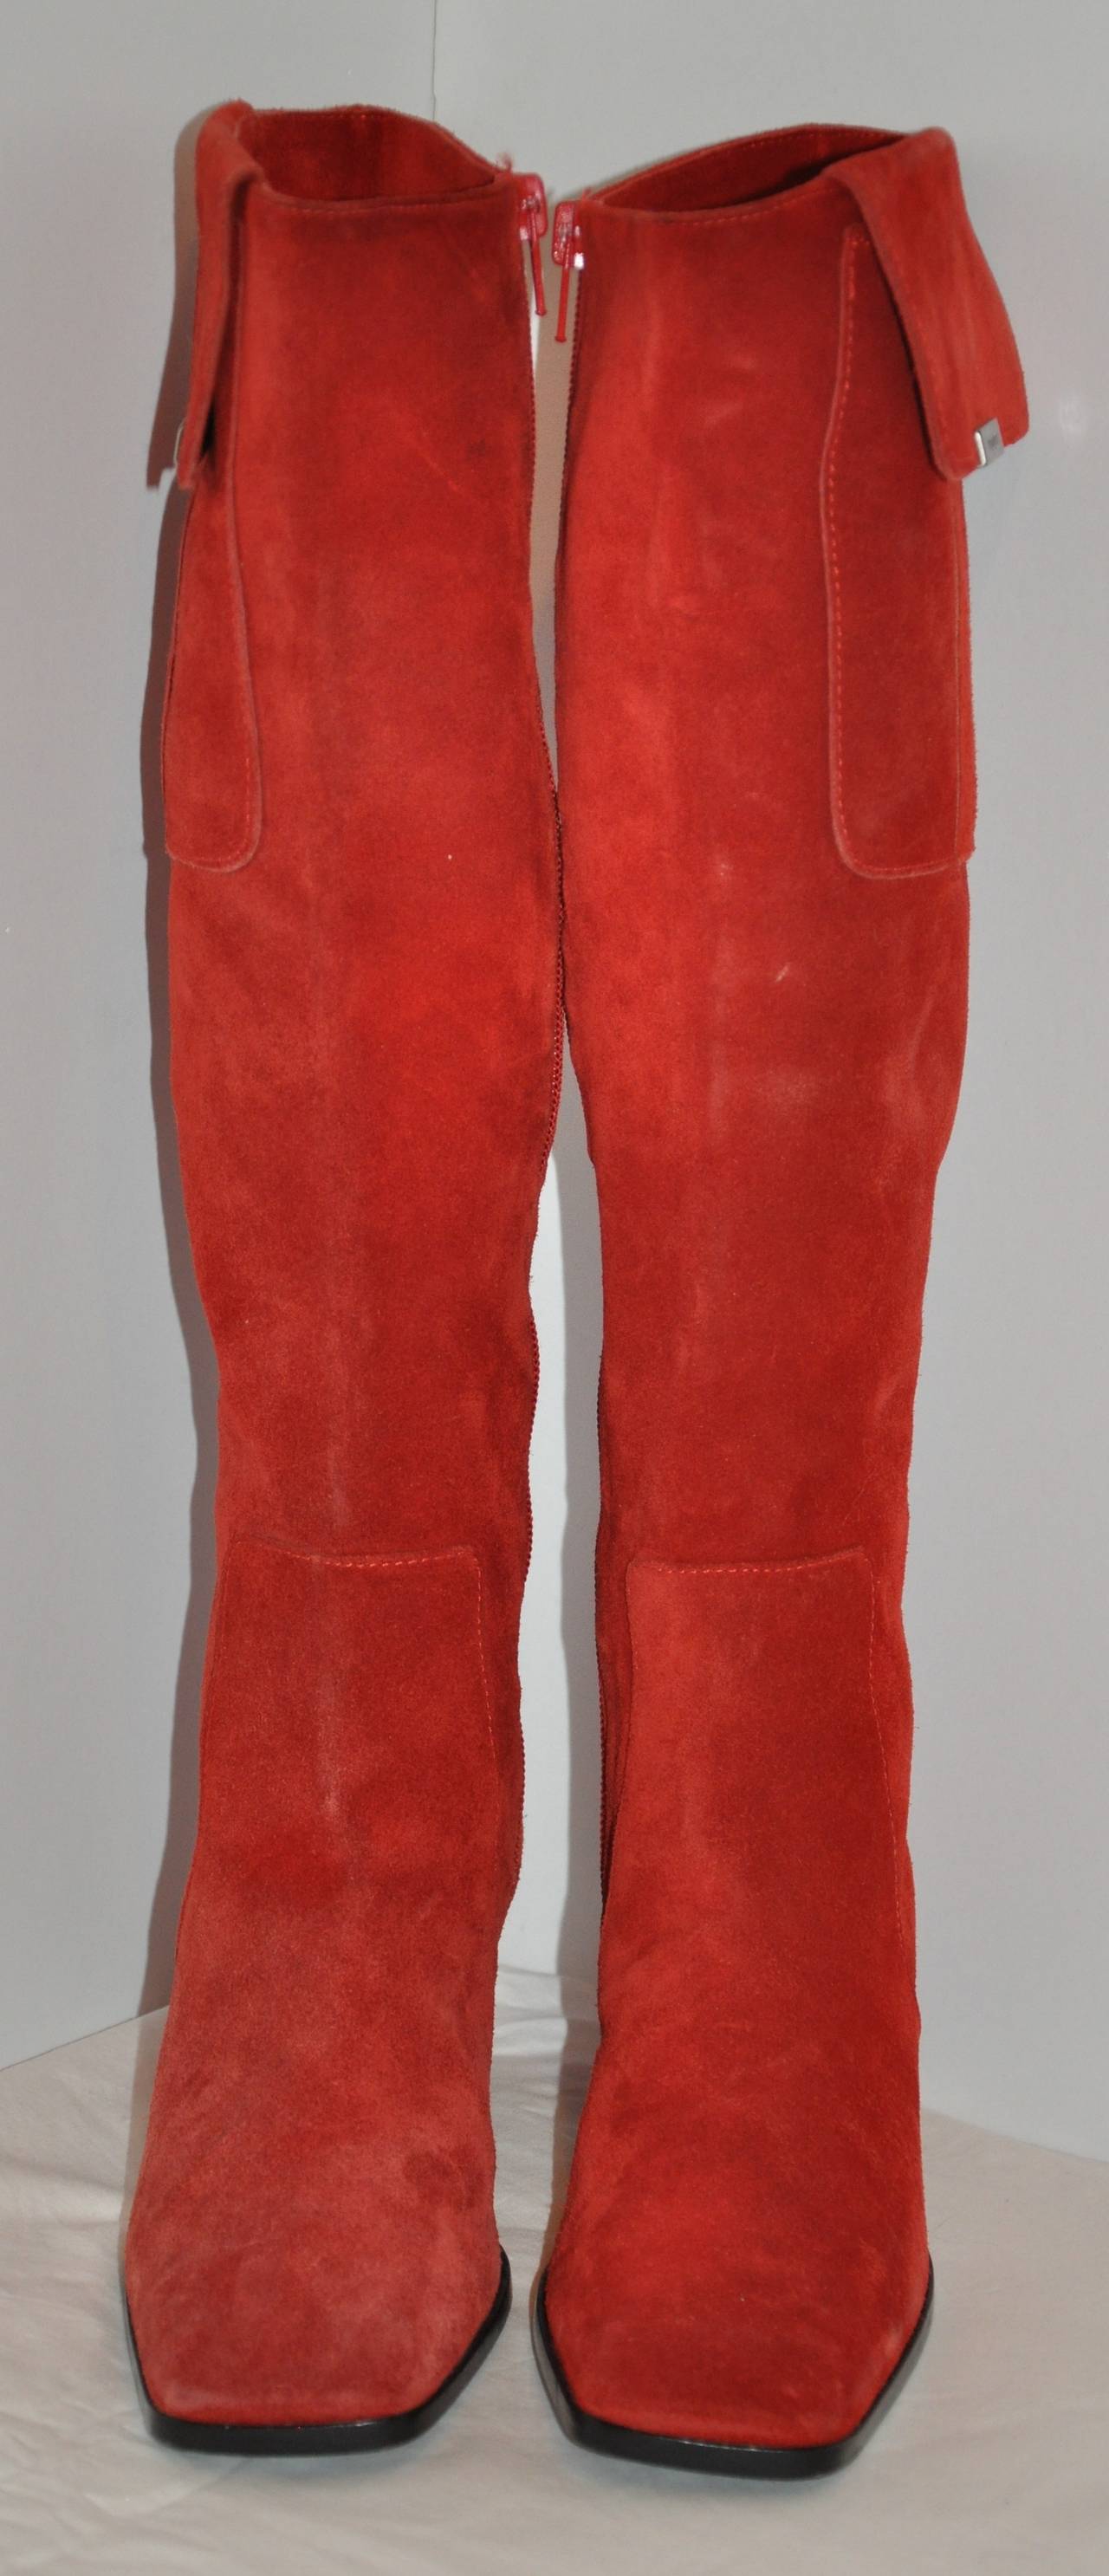 Yves Saint Laurent bold red brush suede high boots is accented with a side patch pocket on each side of these wonderful boots. The patch pockets are detailed with their signature name logo engraved on gold hardware on each and finished with a snap